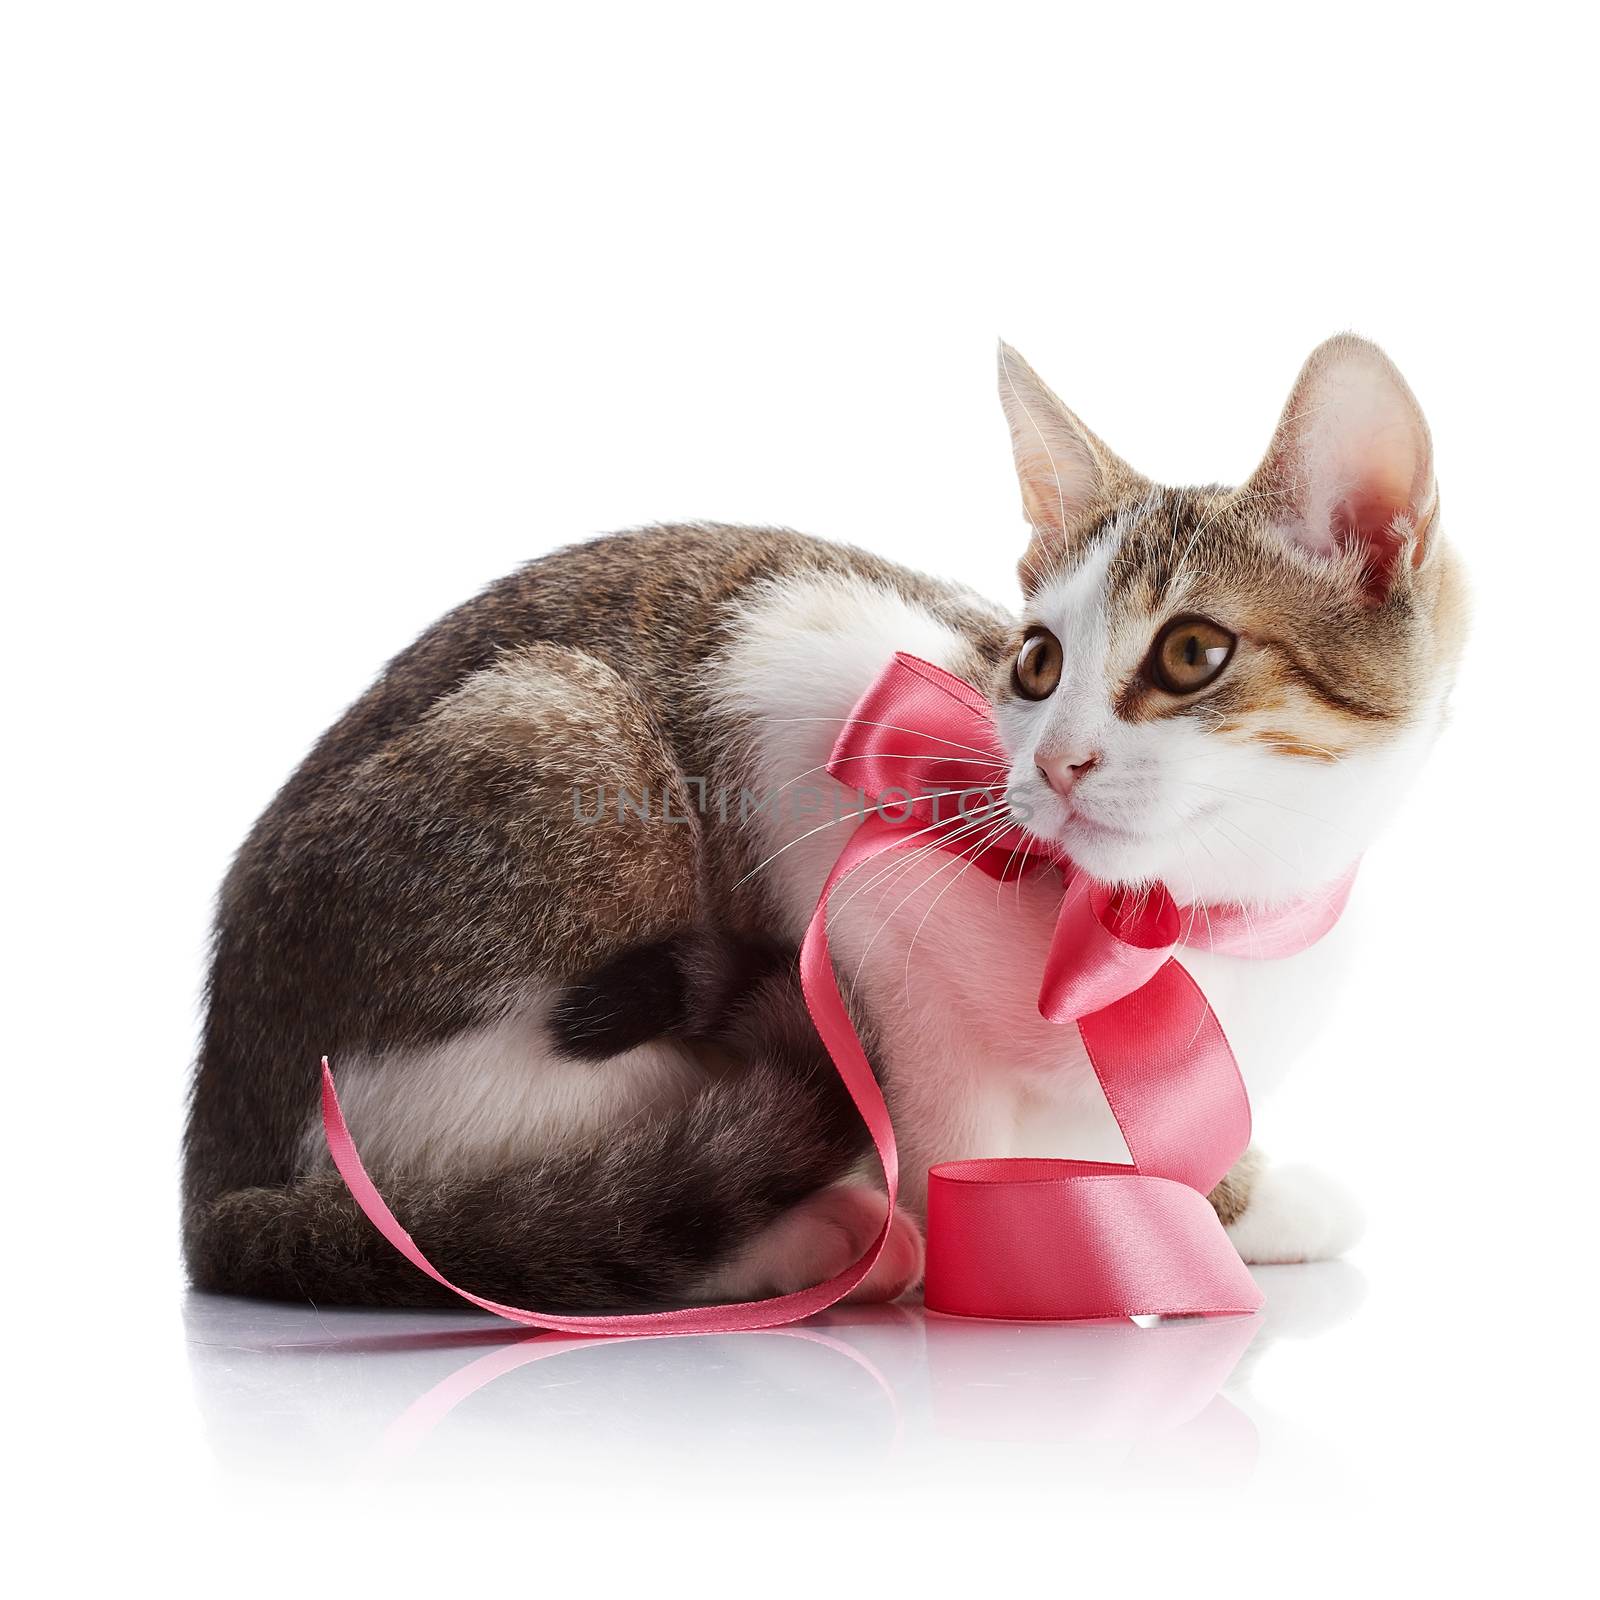 The kitten with a pink tape. Multi-colored small kitten. Kitten on a white background. Small predator. Small cat.